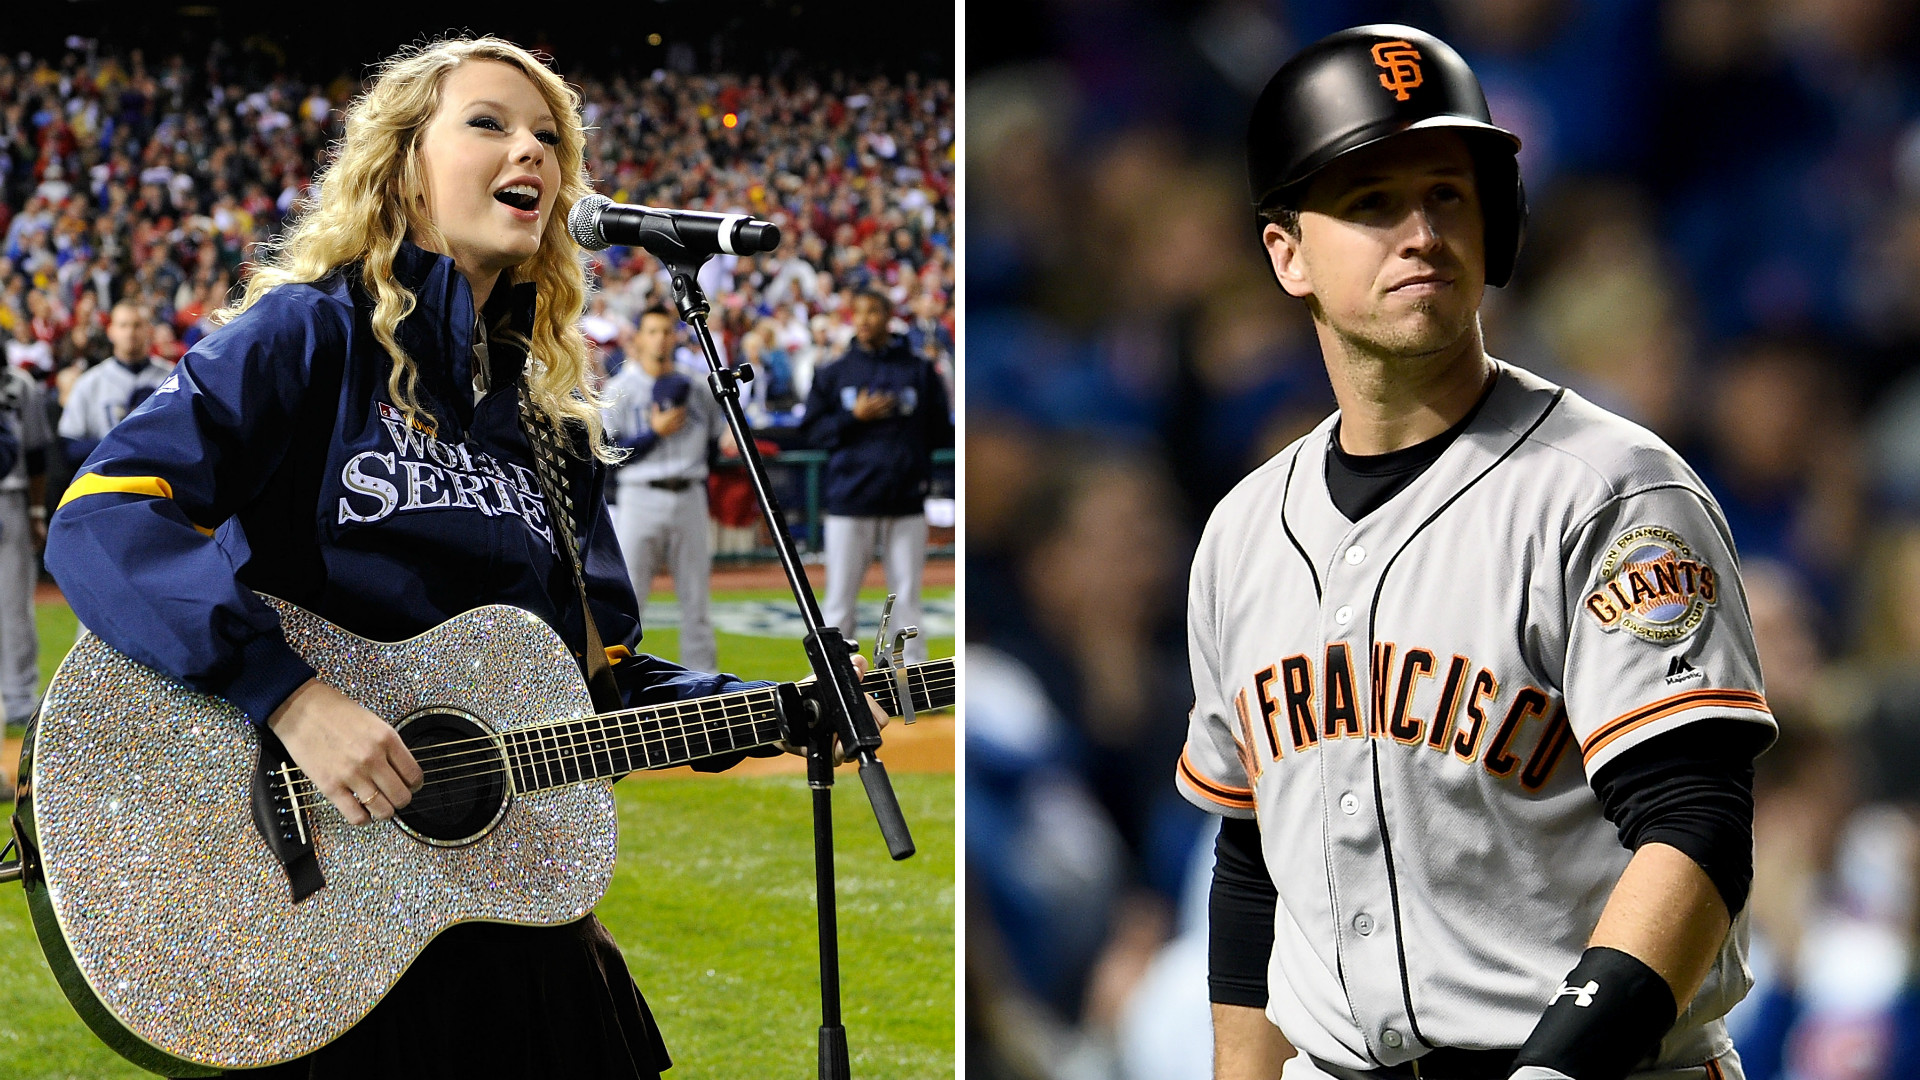 Giants fans are blaming Taylor Swift for loss to Cubs | MLB | Sporting News